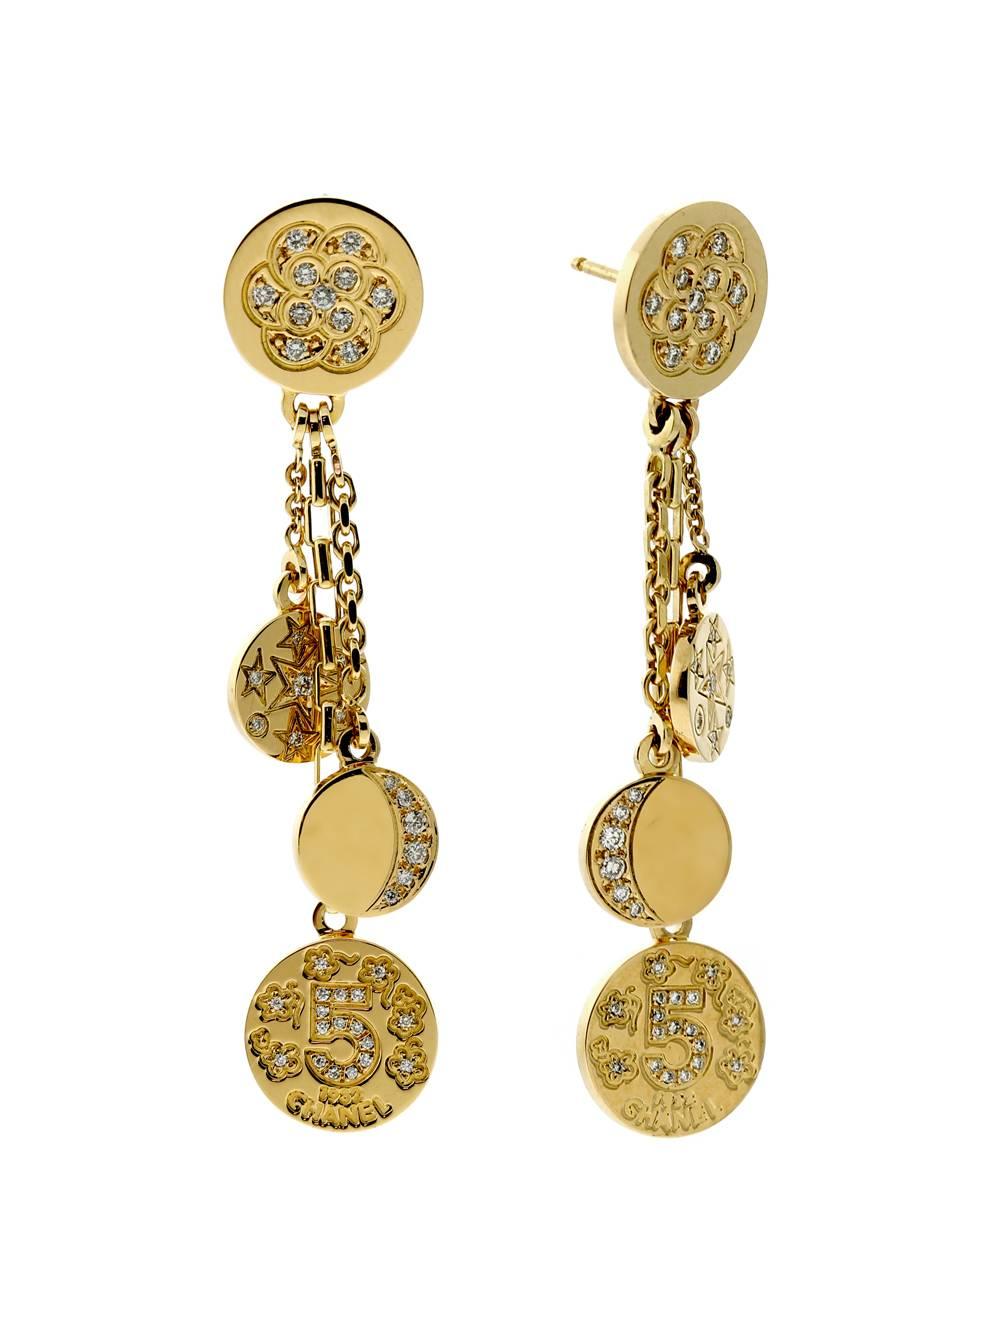 A magnificent pair of Chanel earrings featuring a diamond-encrusted iconic motifs set in 18k yellow gold.

Length: 2.44″ Inches

Inventory ID: 0000051